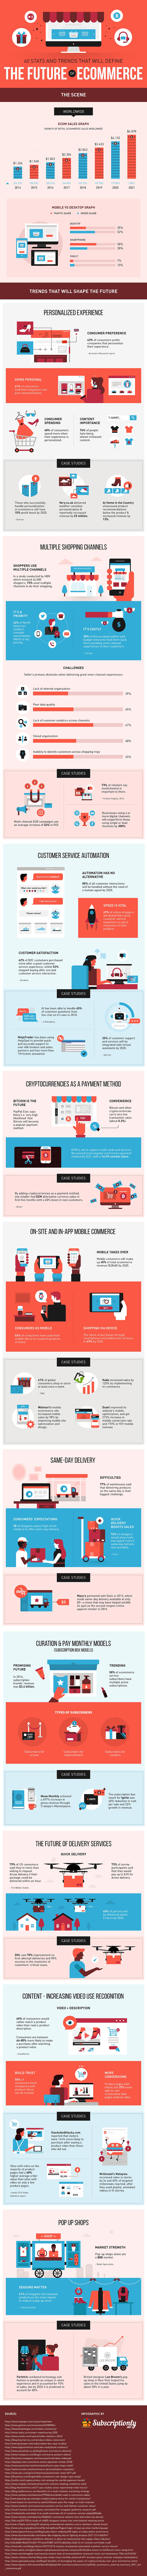 the-future-of-ecommerce-infographic